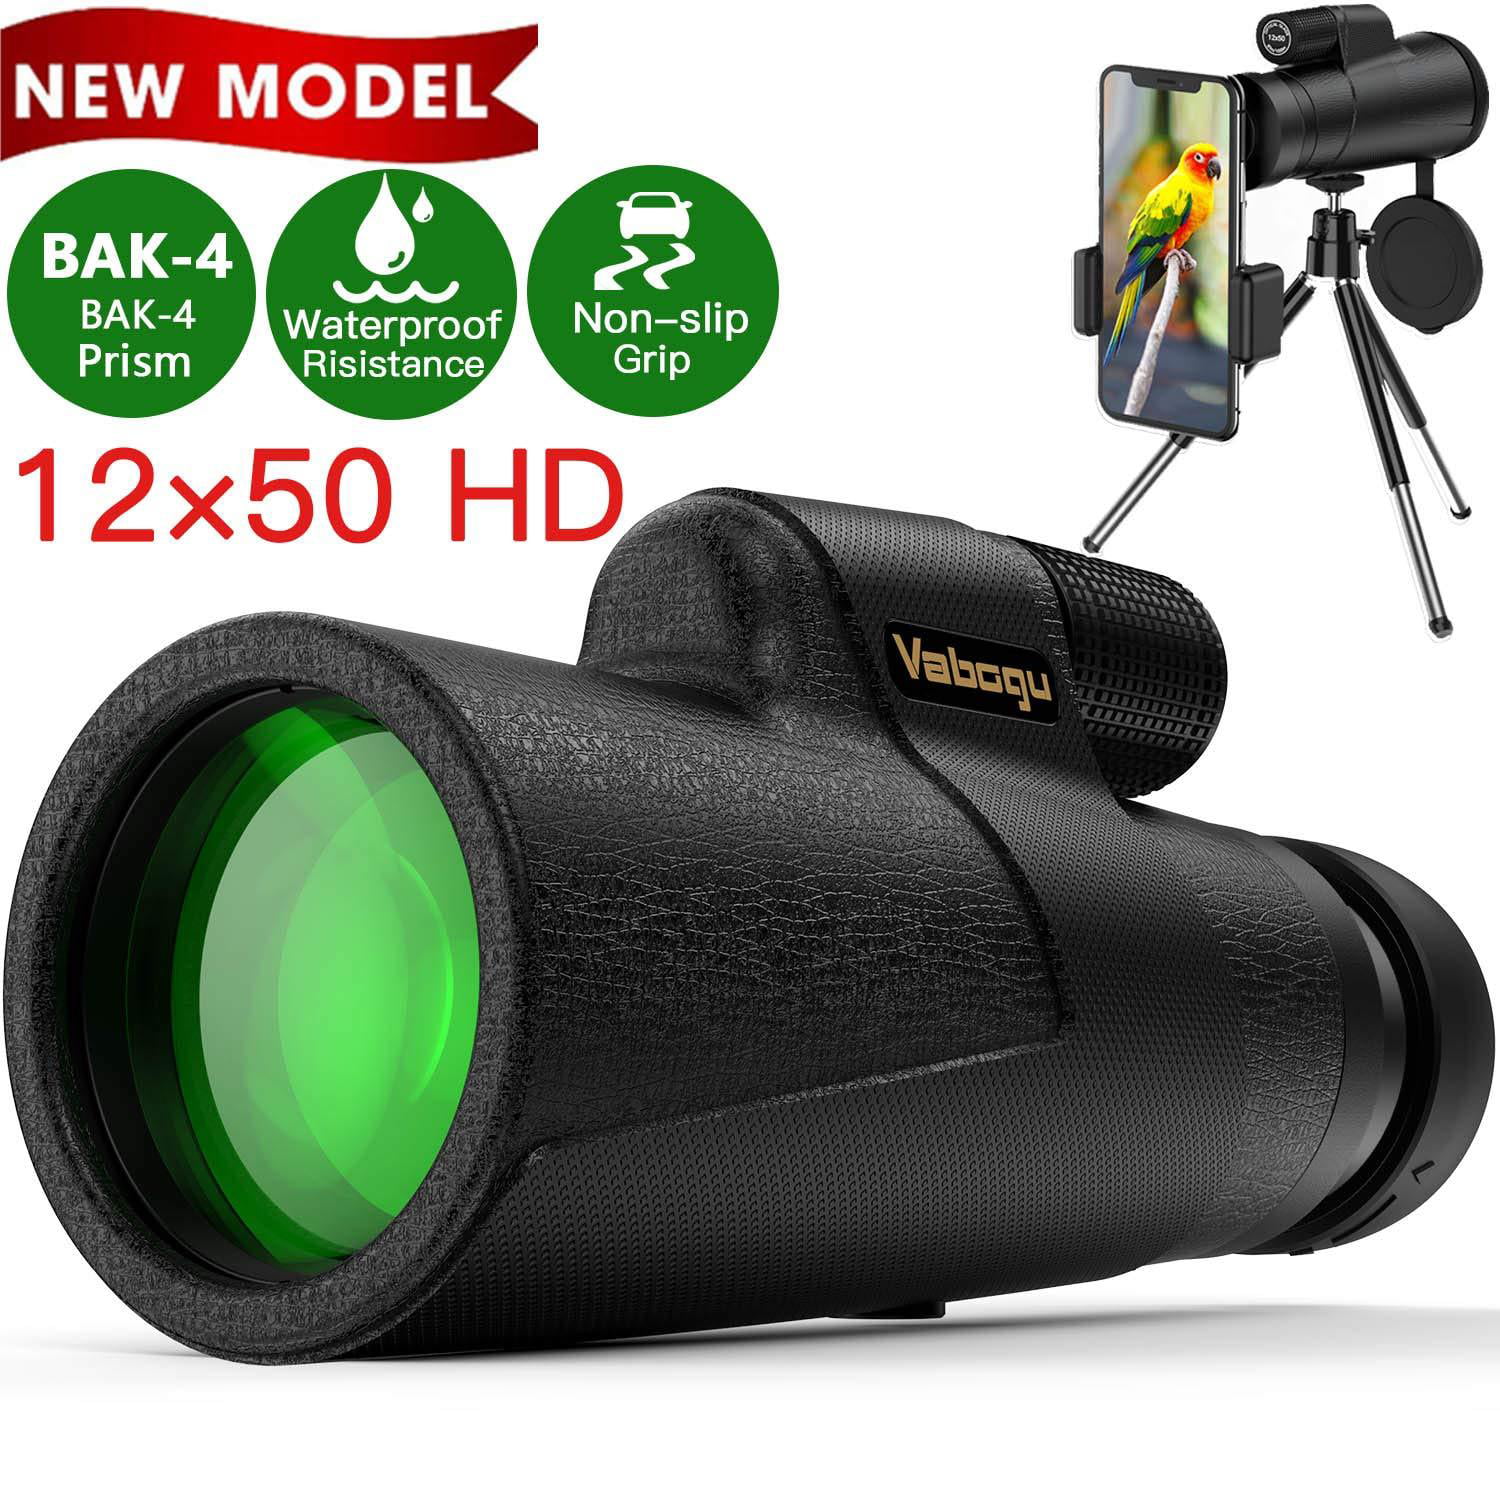 Ellatross Monocular Telescope for Smartphone,Handheld Telescope for Adults with 12X50 HD High Power,for Bird Watching,Wildlife,Concert,Camping,Sporting Game 